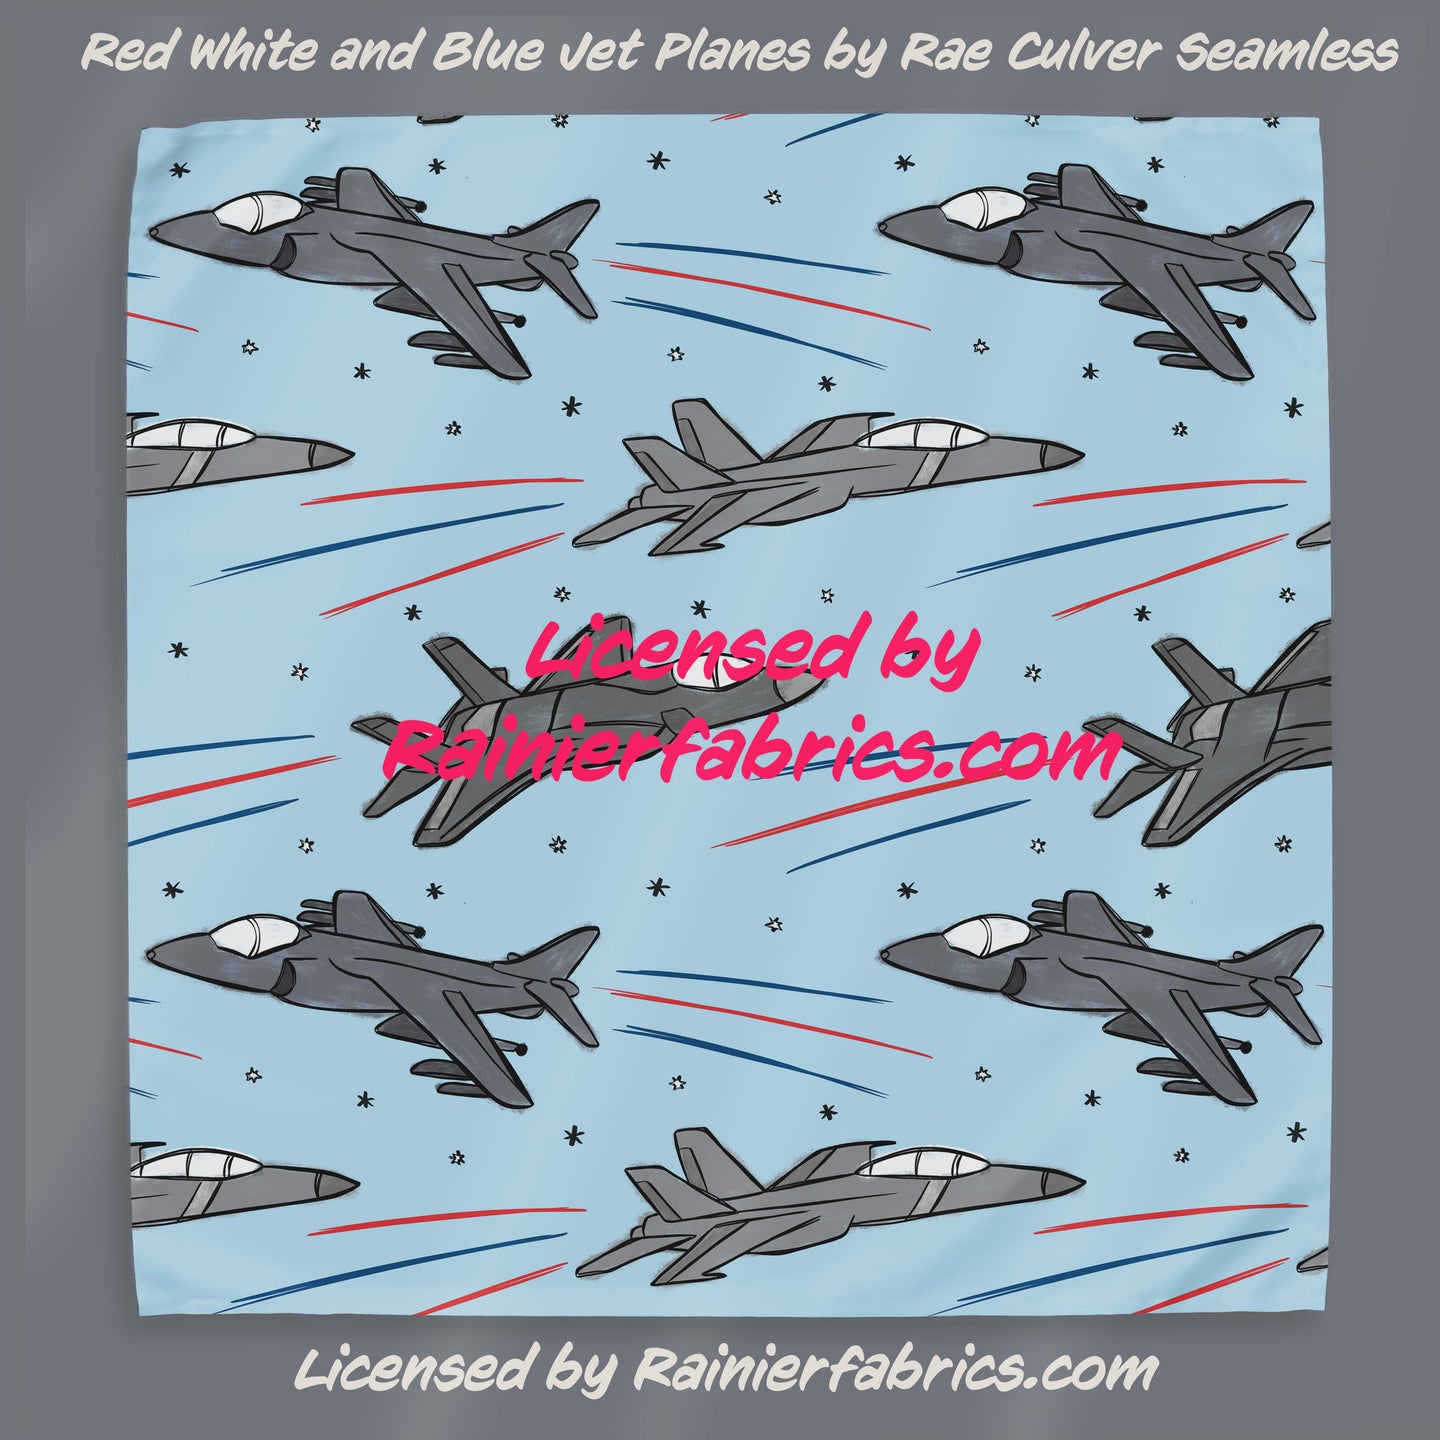 Red White and Blue Jets and Planes by Rae Culver Seamless - 2-5 business days to ship - Order by 1/2 yard